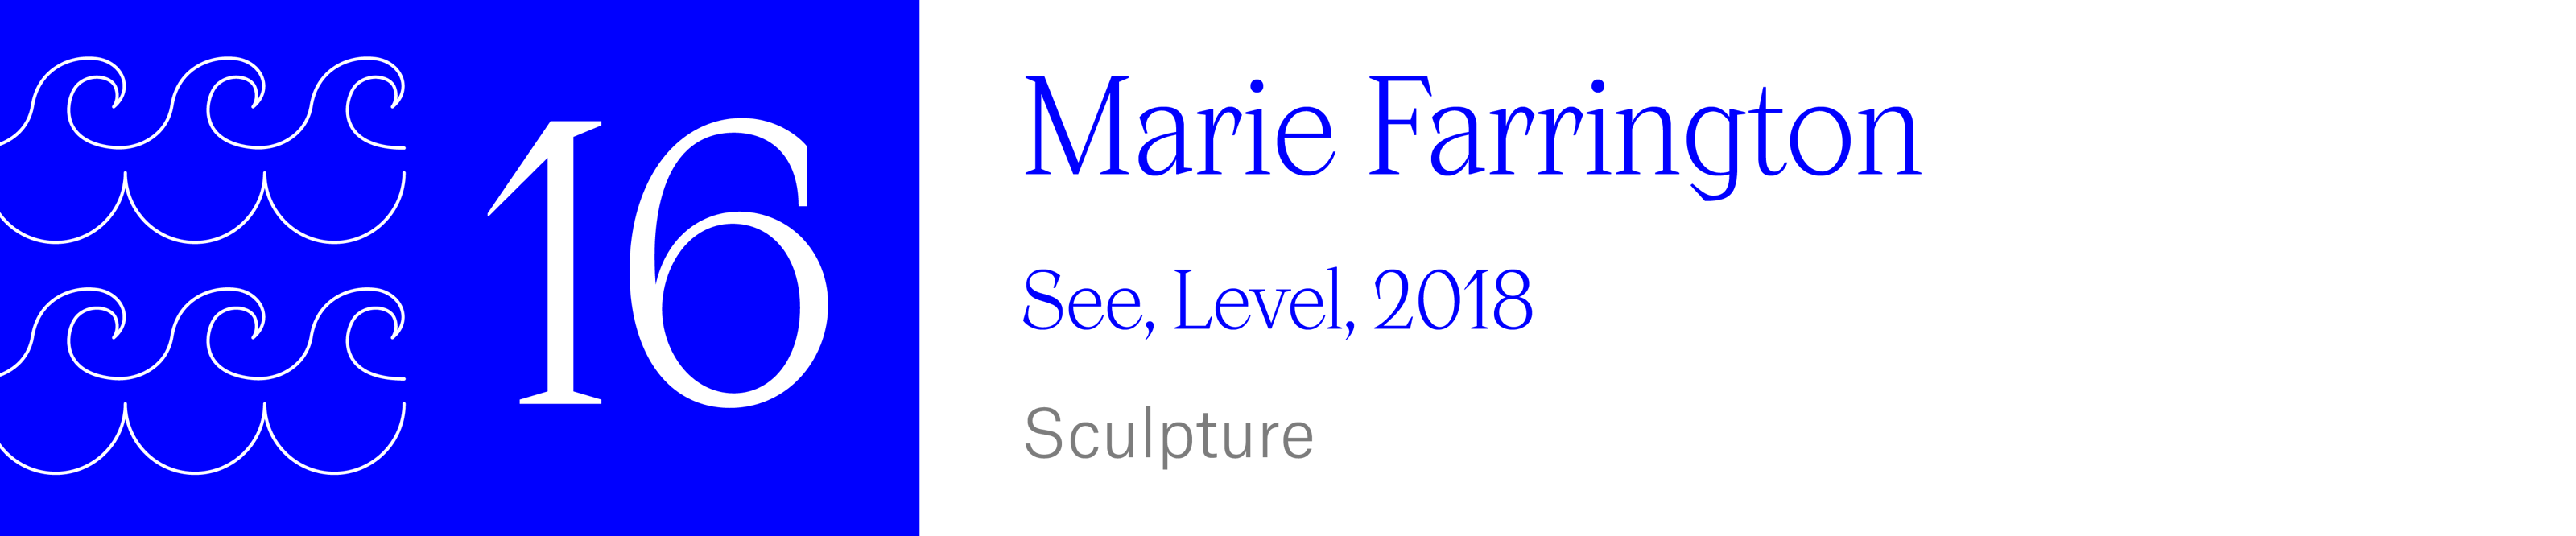 The Wave (16) - Marie Farrington - See, Level, 2018. Sculpture.